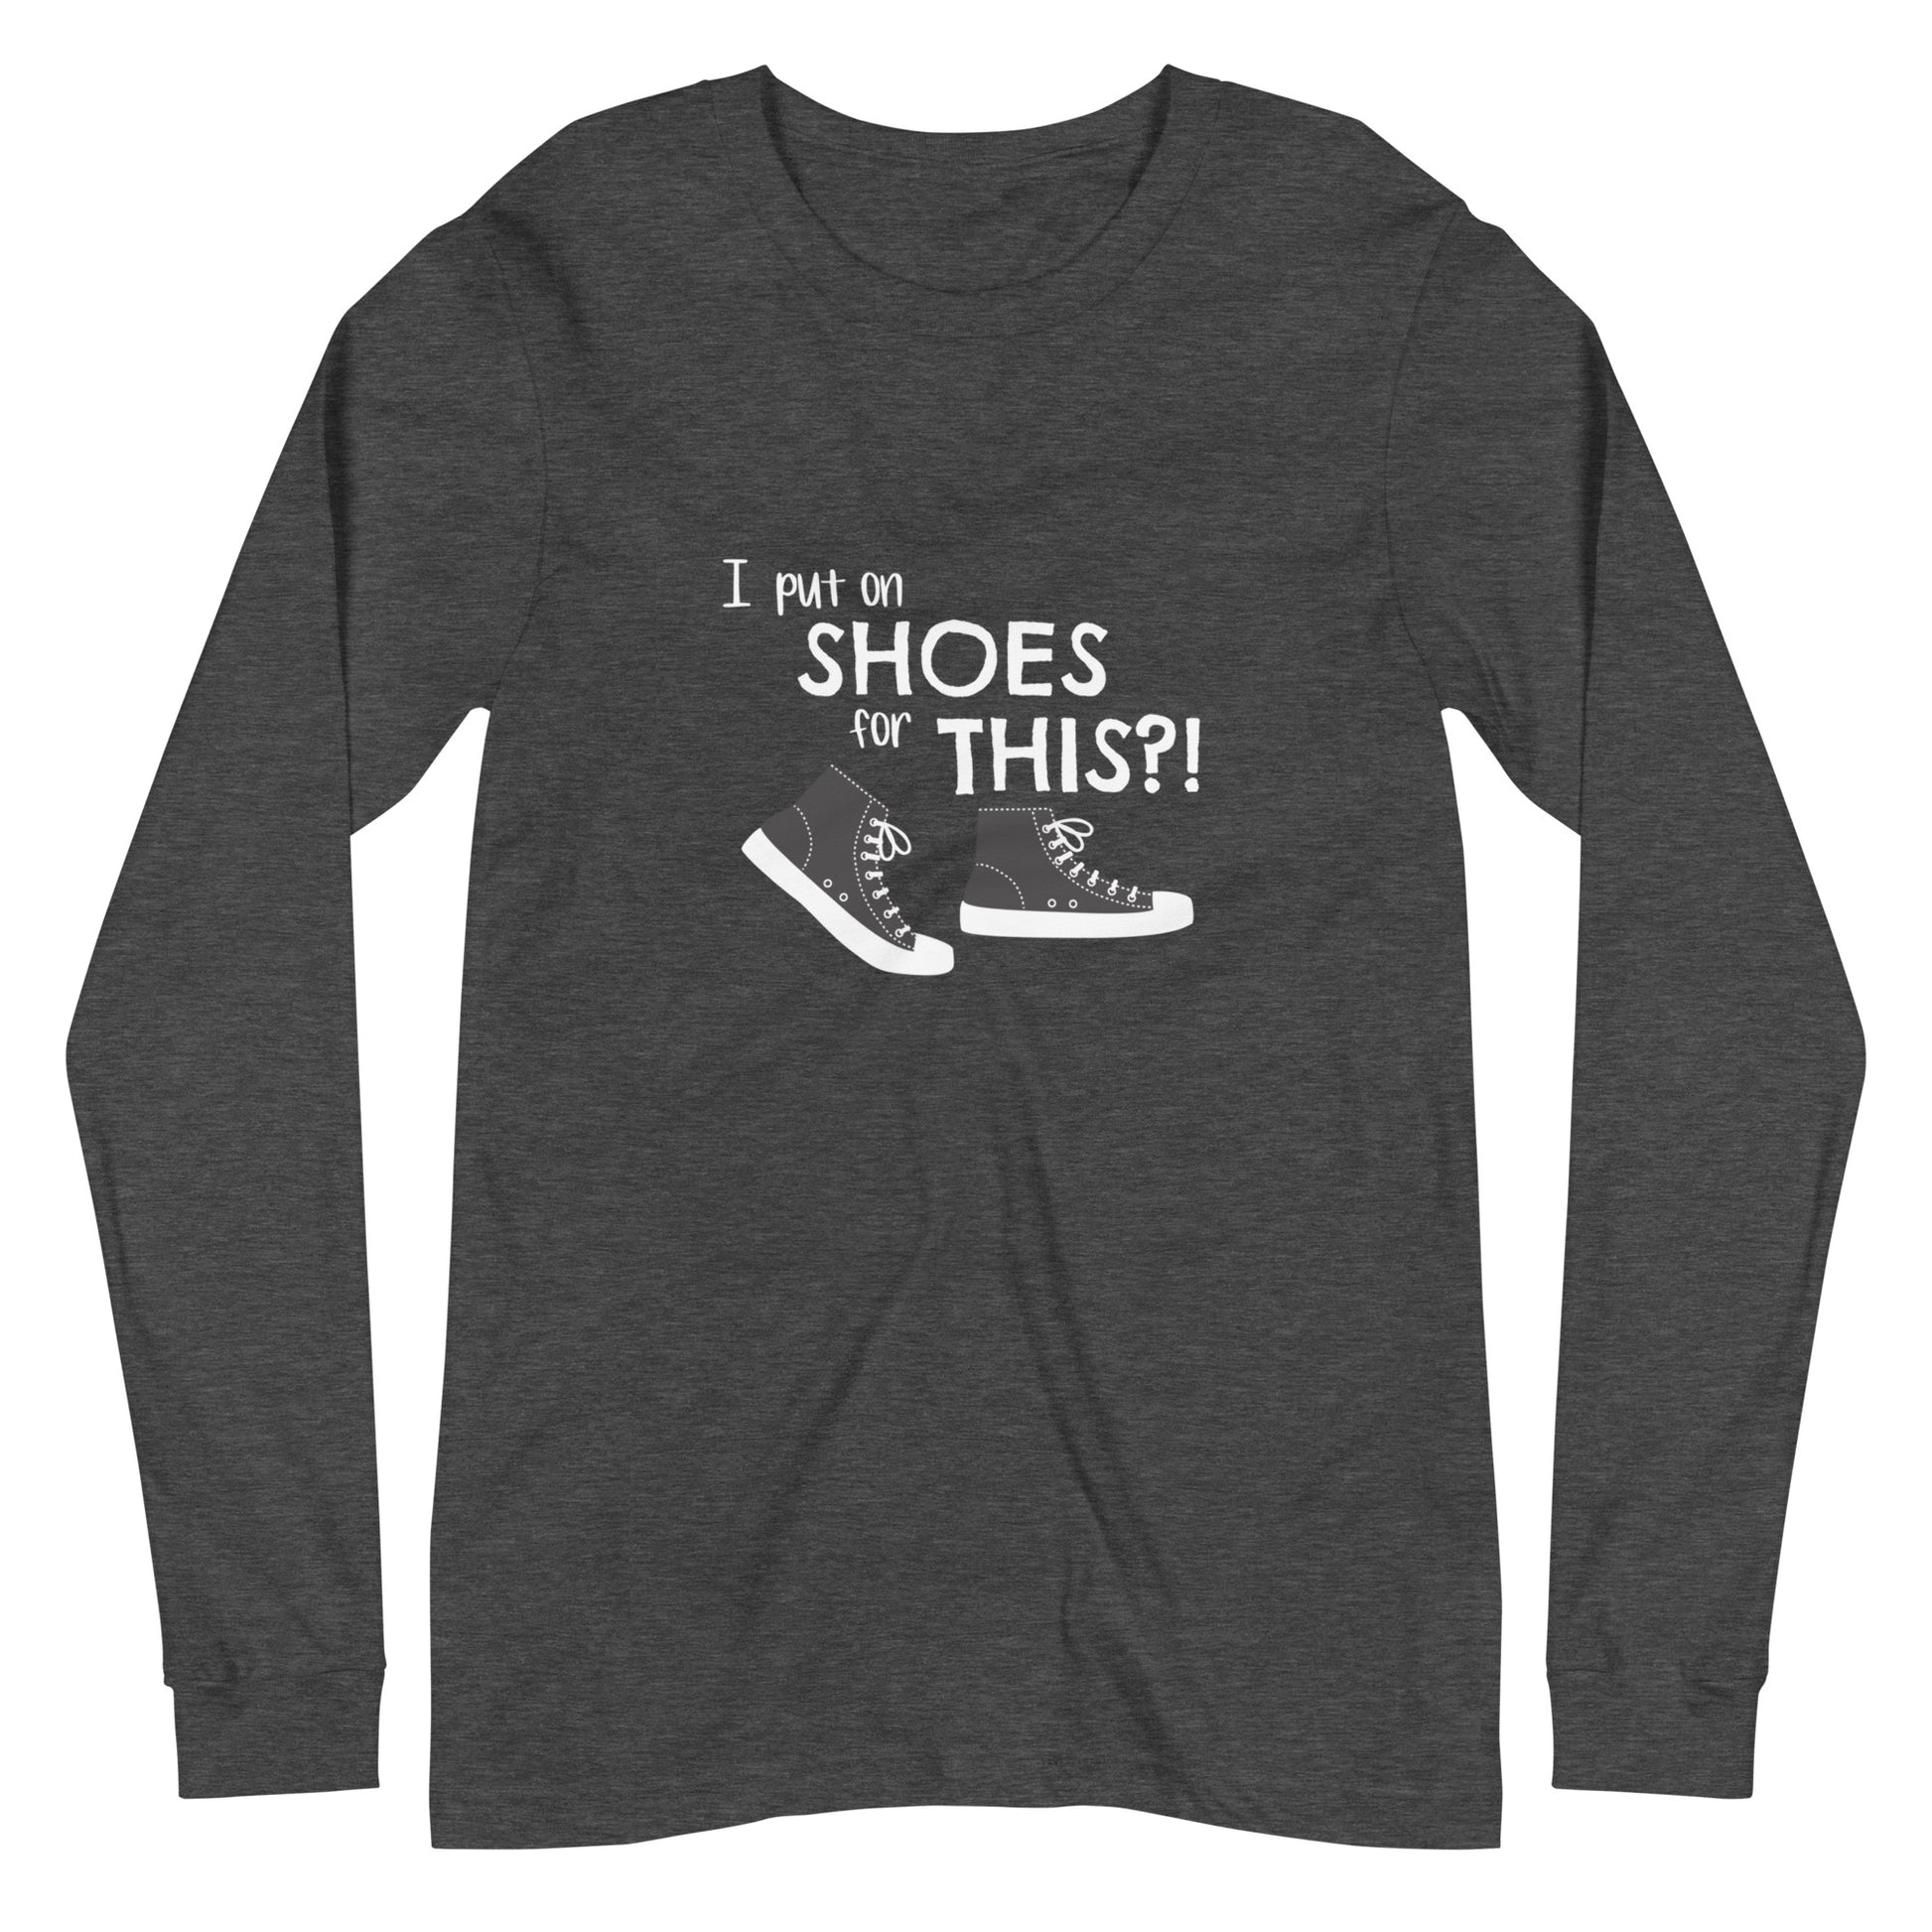 Dark Grey Heather long-sleeve t-shirt with graphic of black and white canvas "chuck" sneakers and text: "I put on SHOES for THIS?!"